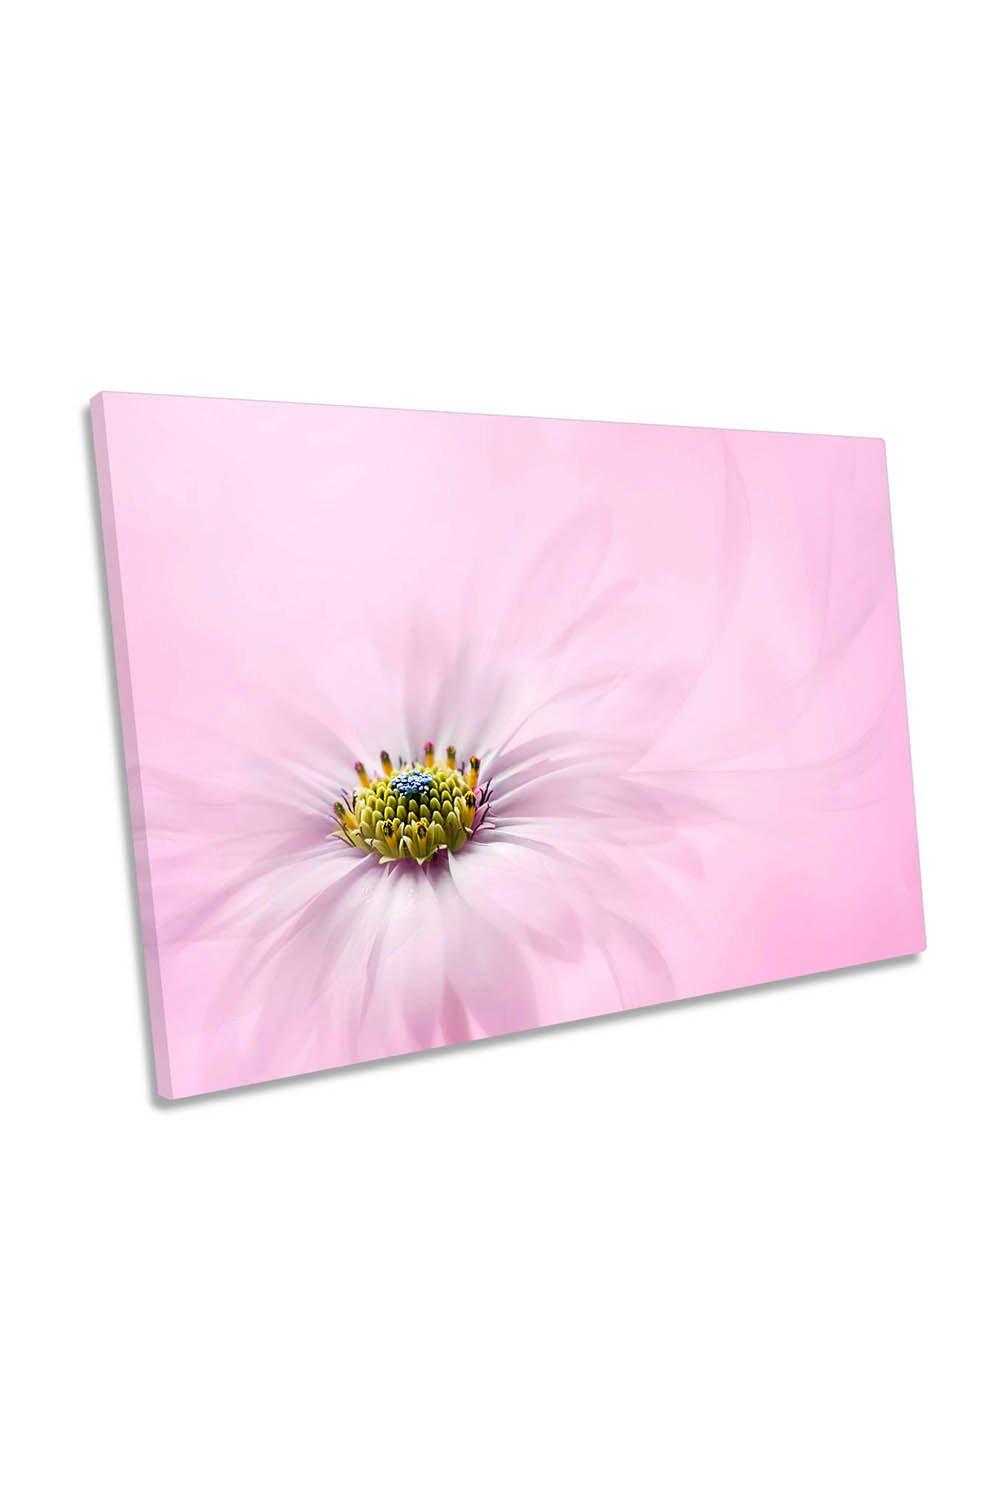 Softness Flower Floral Pink Canvas Wall Art Picture Print